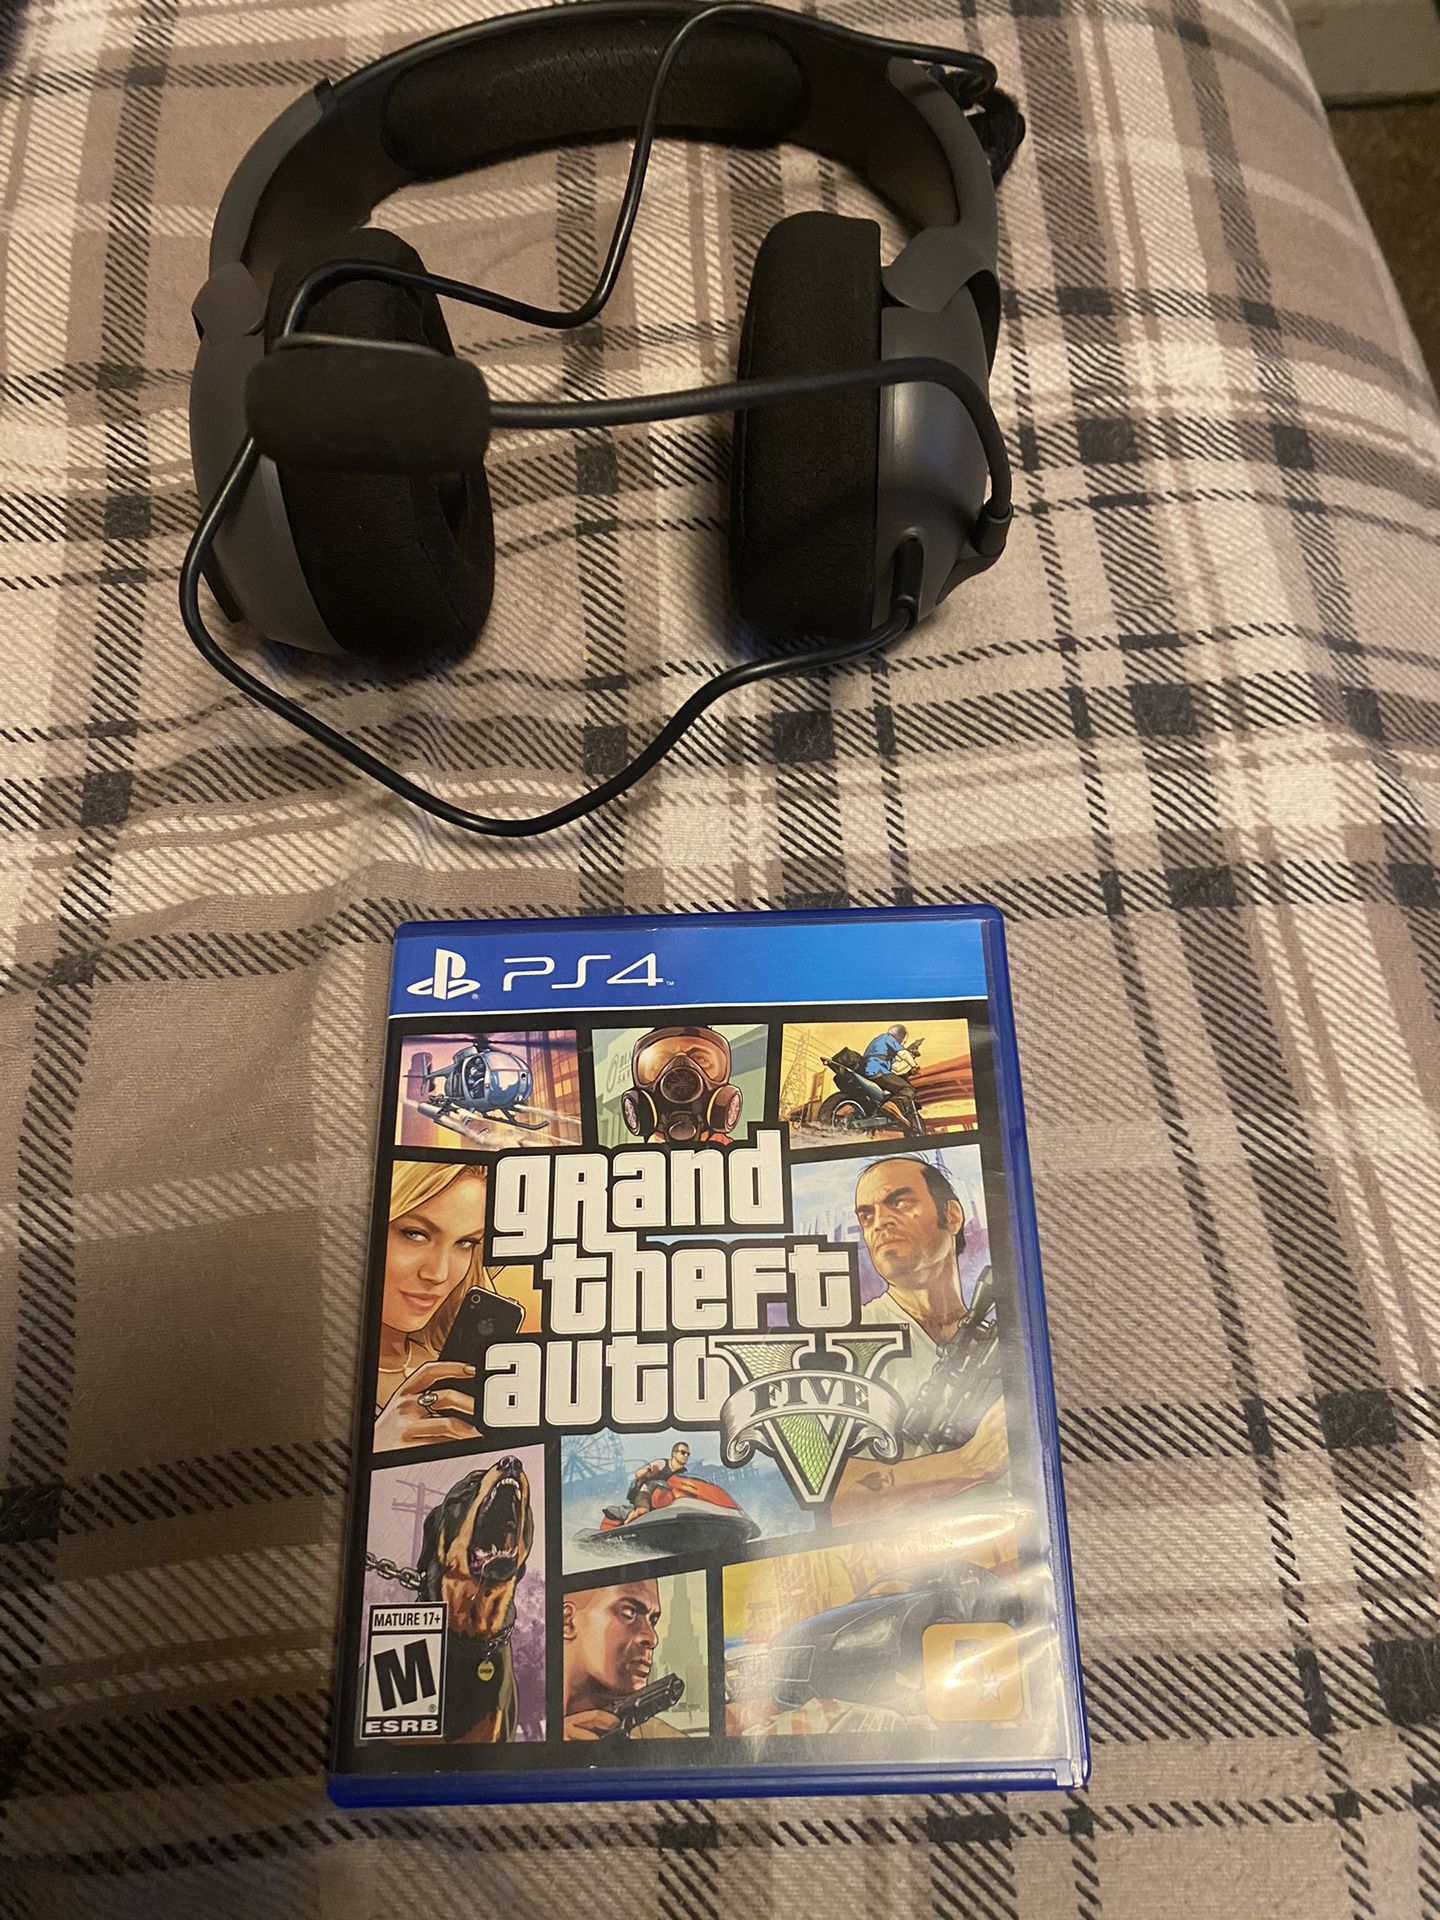 Play Station Headphones And Game